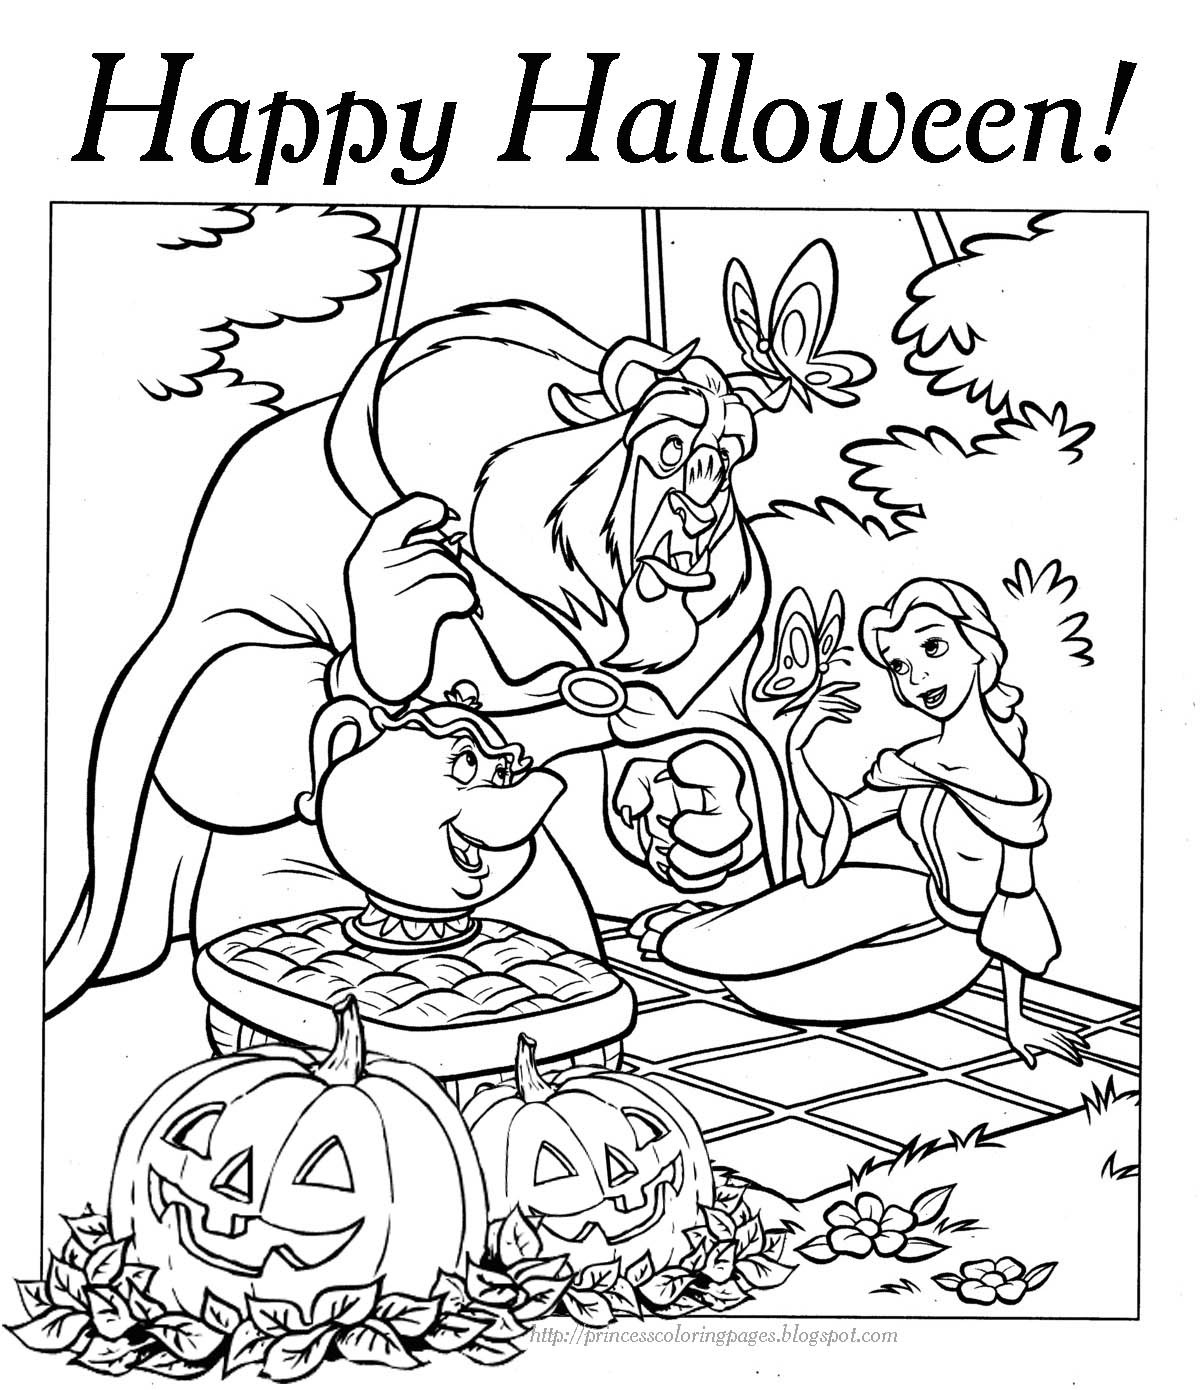 Free Printable Halloween Coloring Pages
 PRINCESS COLORING PAGES